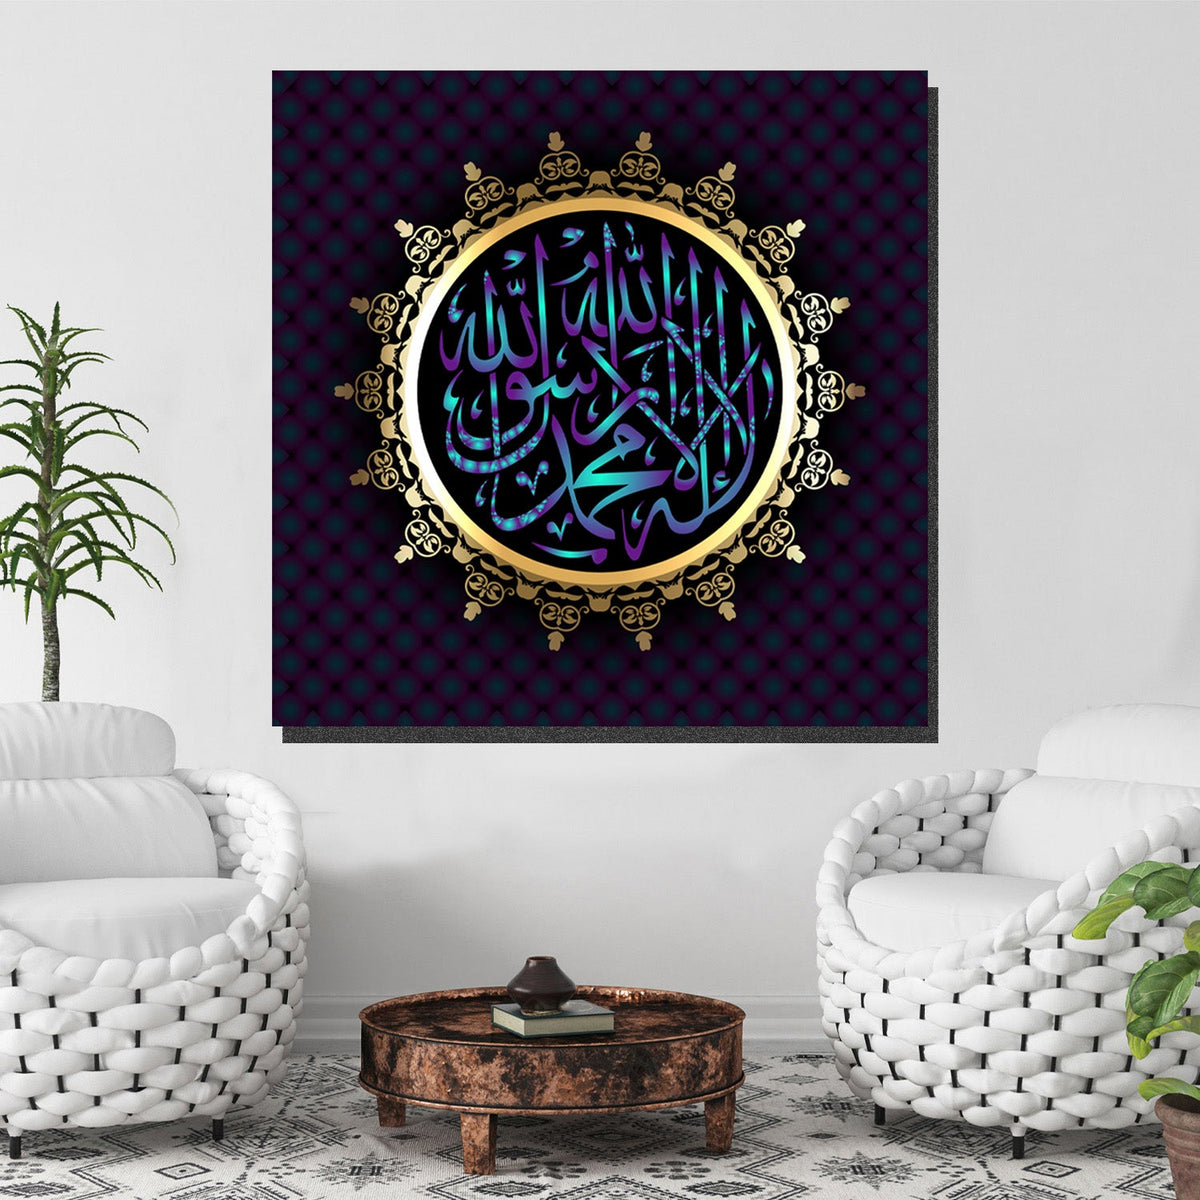 https://cdn.shopify.com/s/files/1/0387/9986/8044/products/IslamicArtLimitedEdition20CanvasArtprintStretched-3.jpg